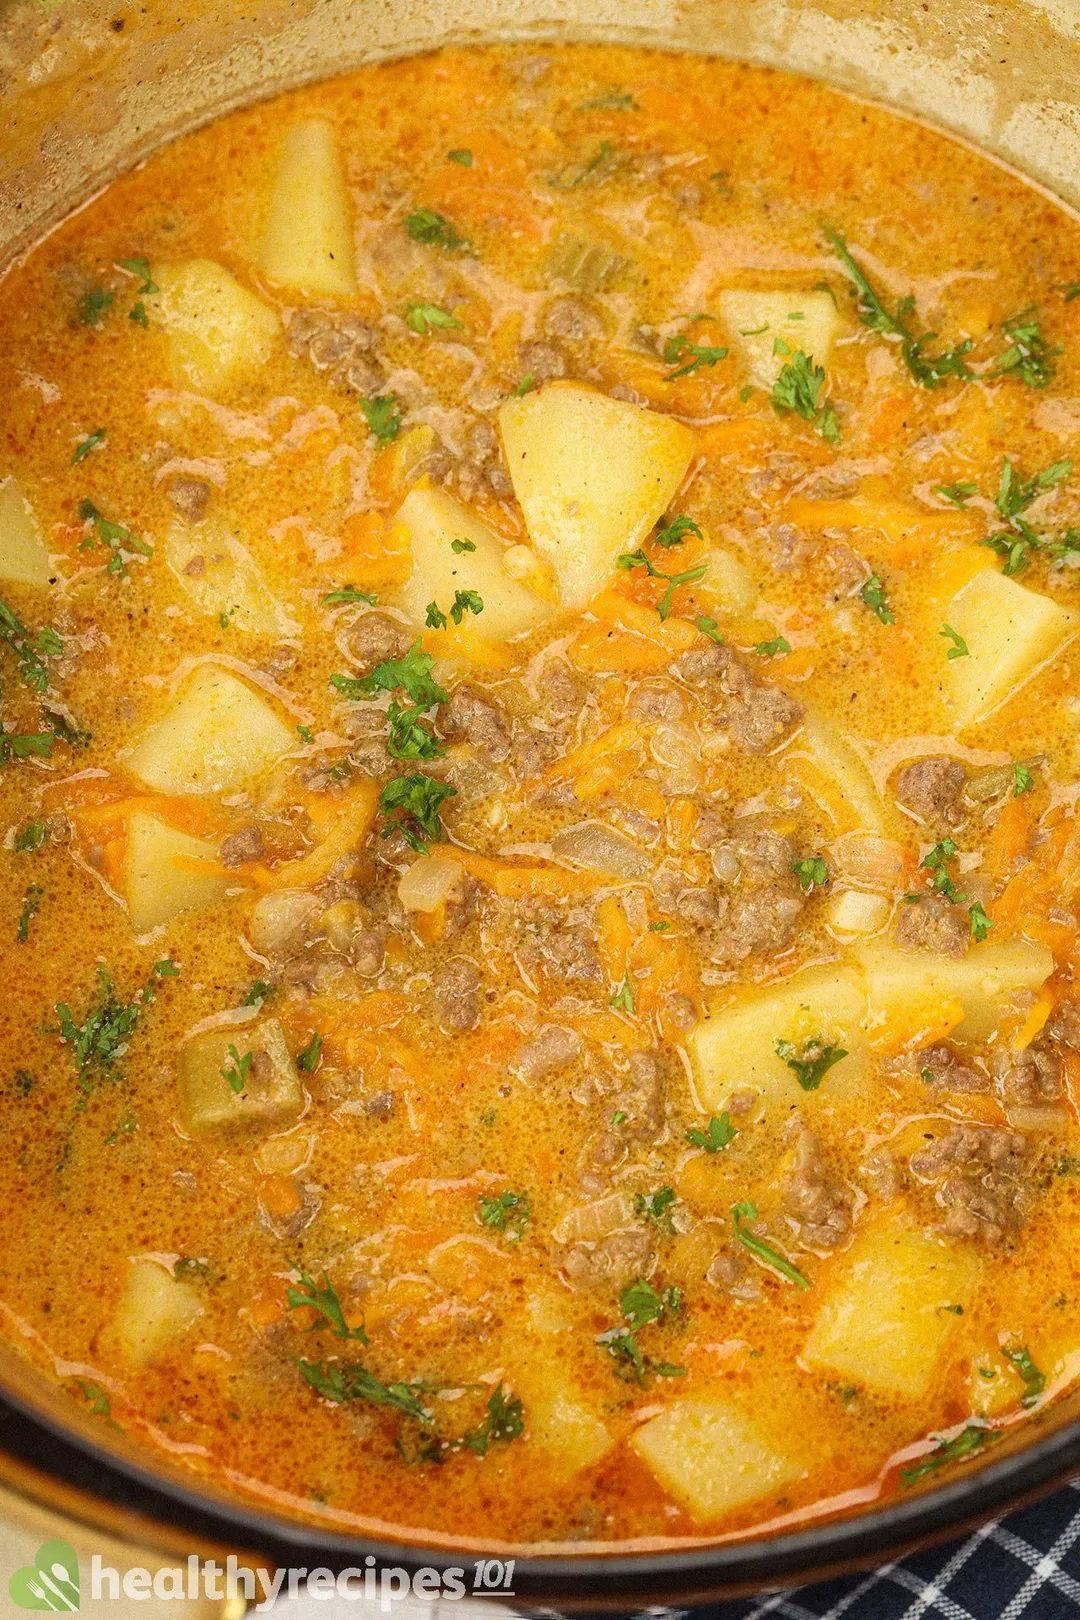 A saucepan filled with cooked potato cubes, ground beef, chopped parsley, and a thick dark yellow broth